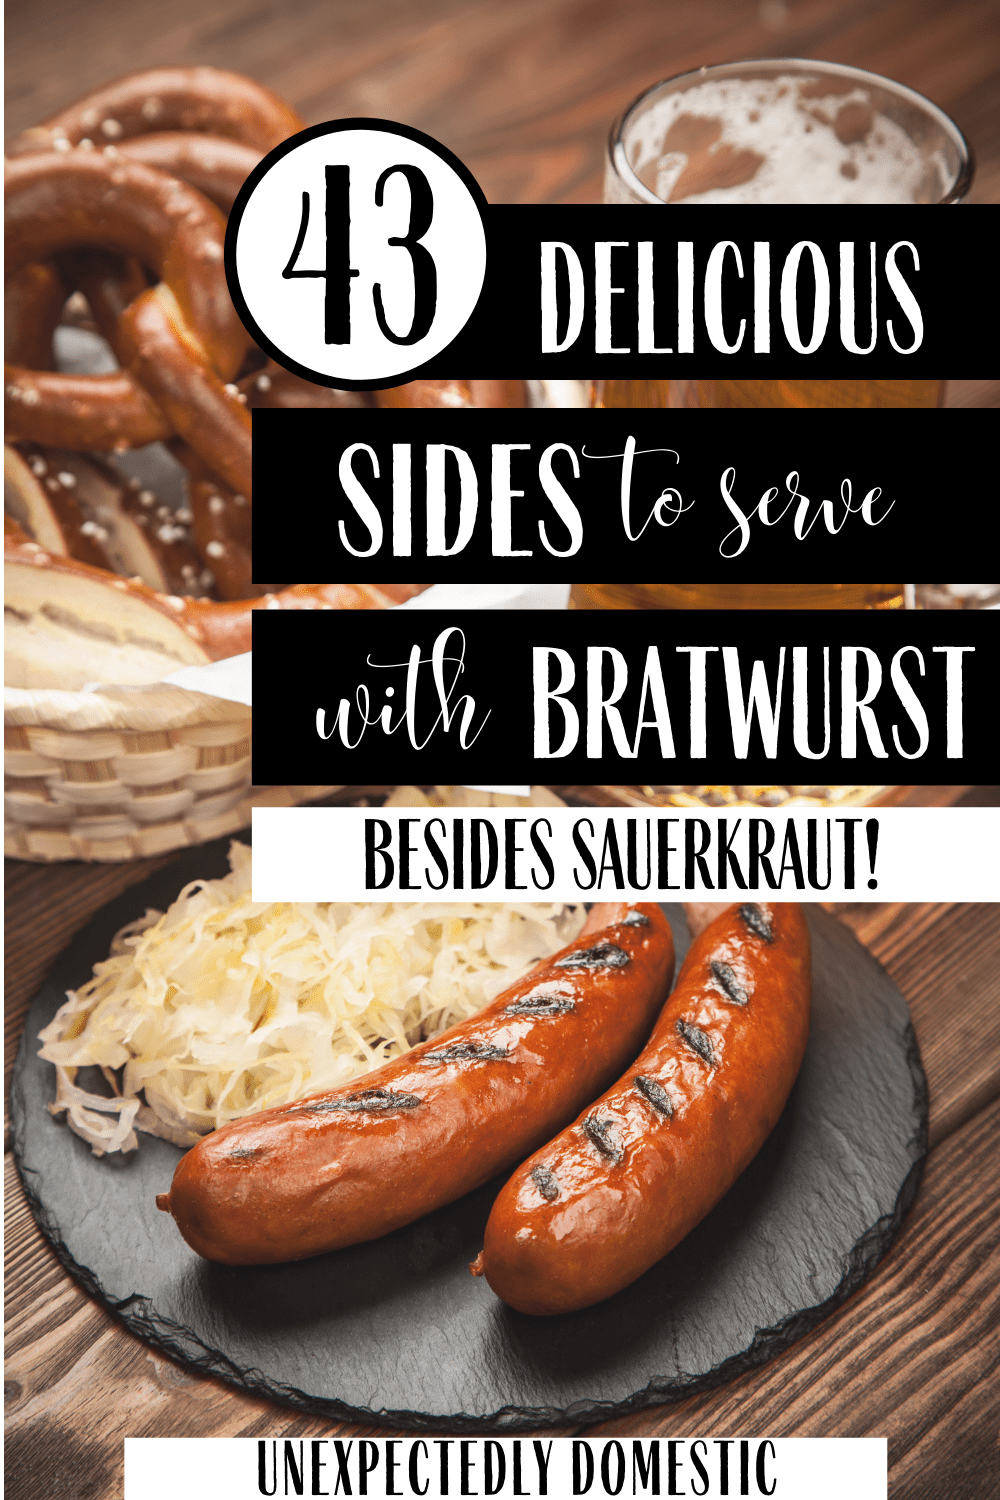 What to eat with bratwurst! These delicious, quick side dishes will turn a basic brat and sauerkraut dinner into something spectacular!